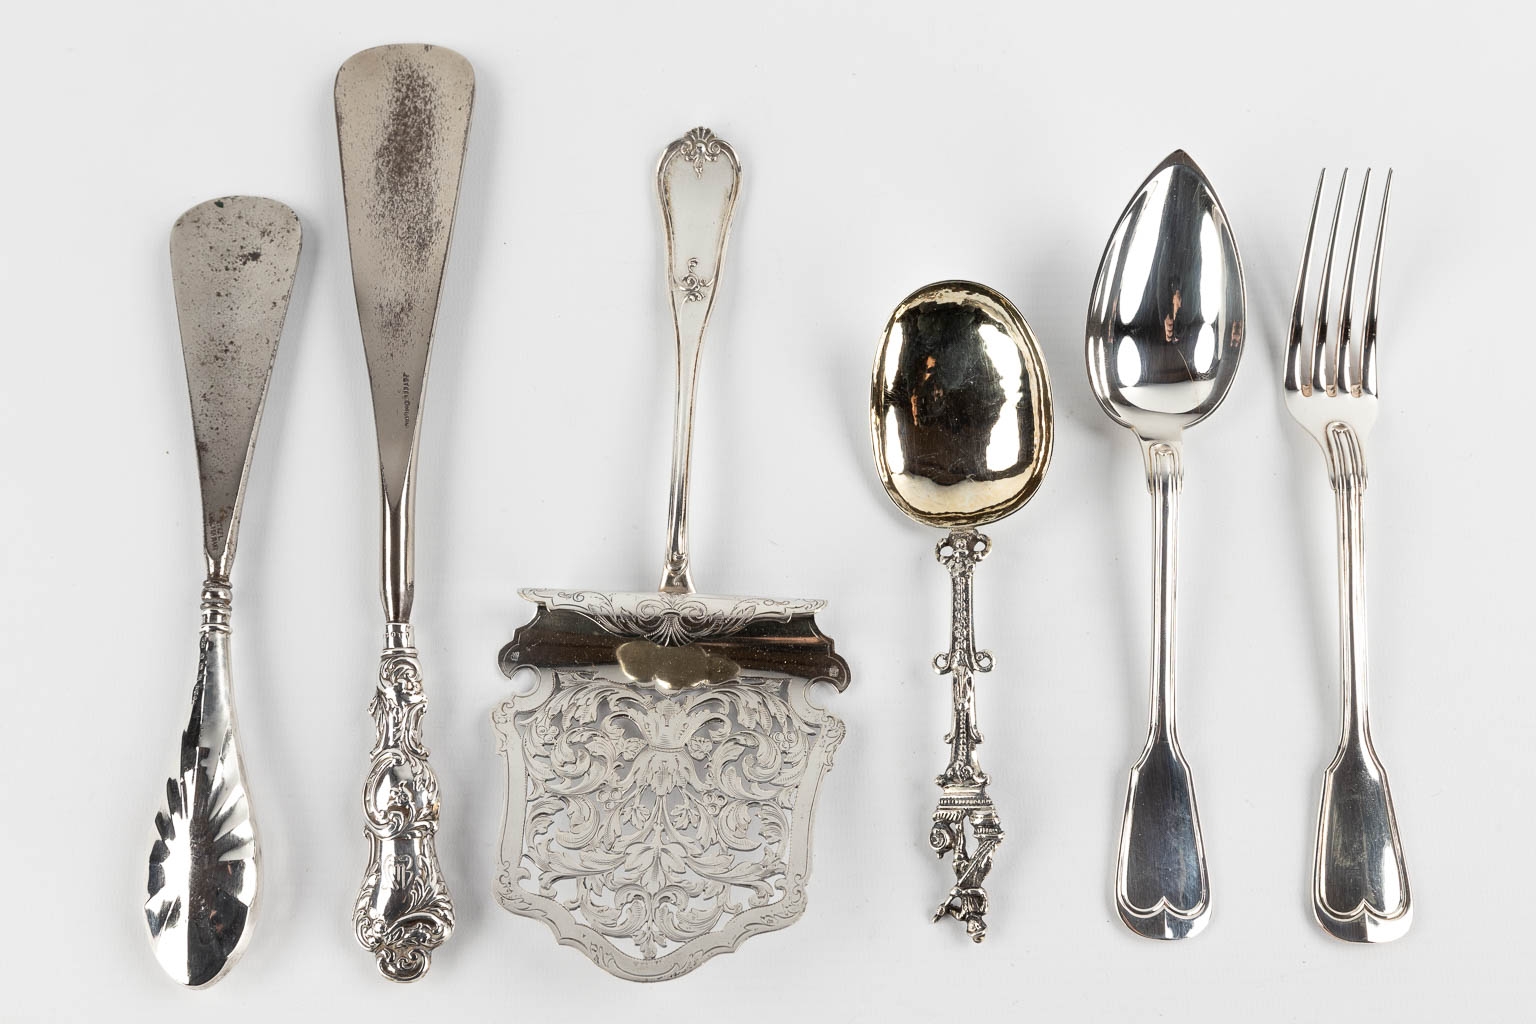 A large collection of table accessories and utensils, silver. (D:20,5 x W:30 x H:4 cm)